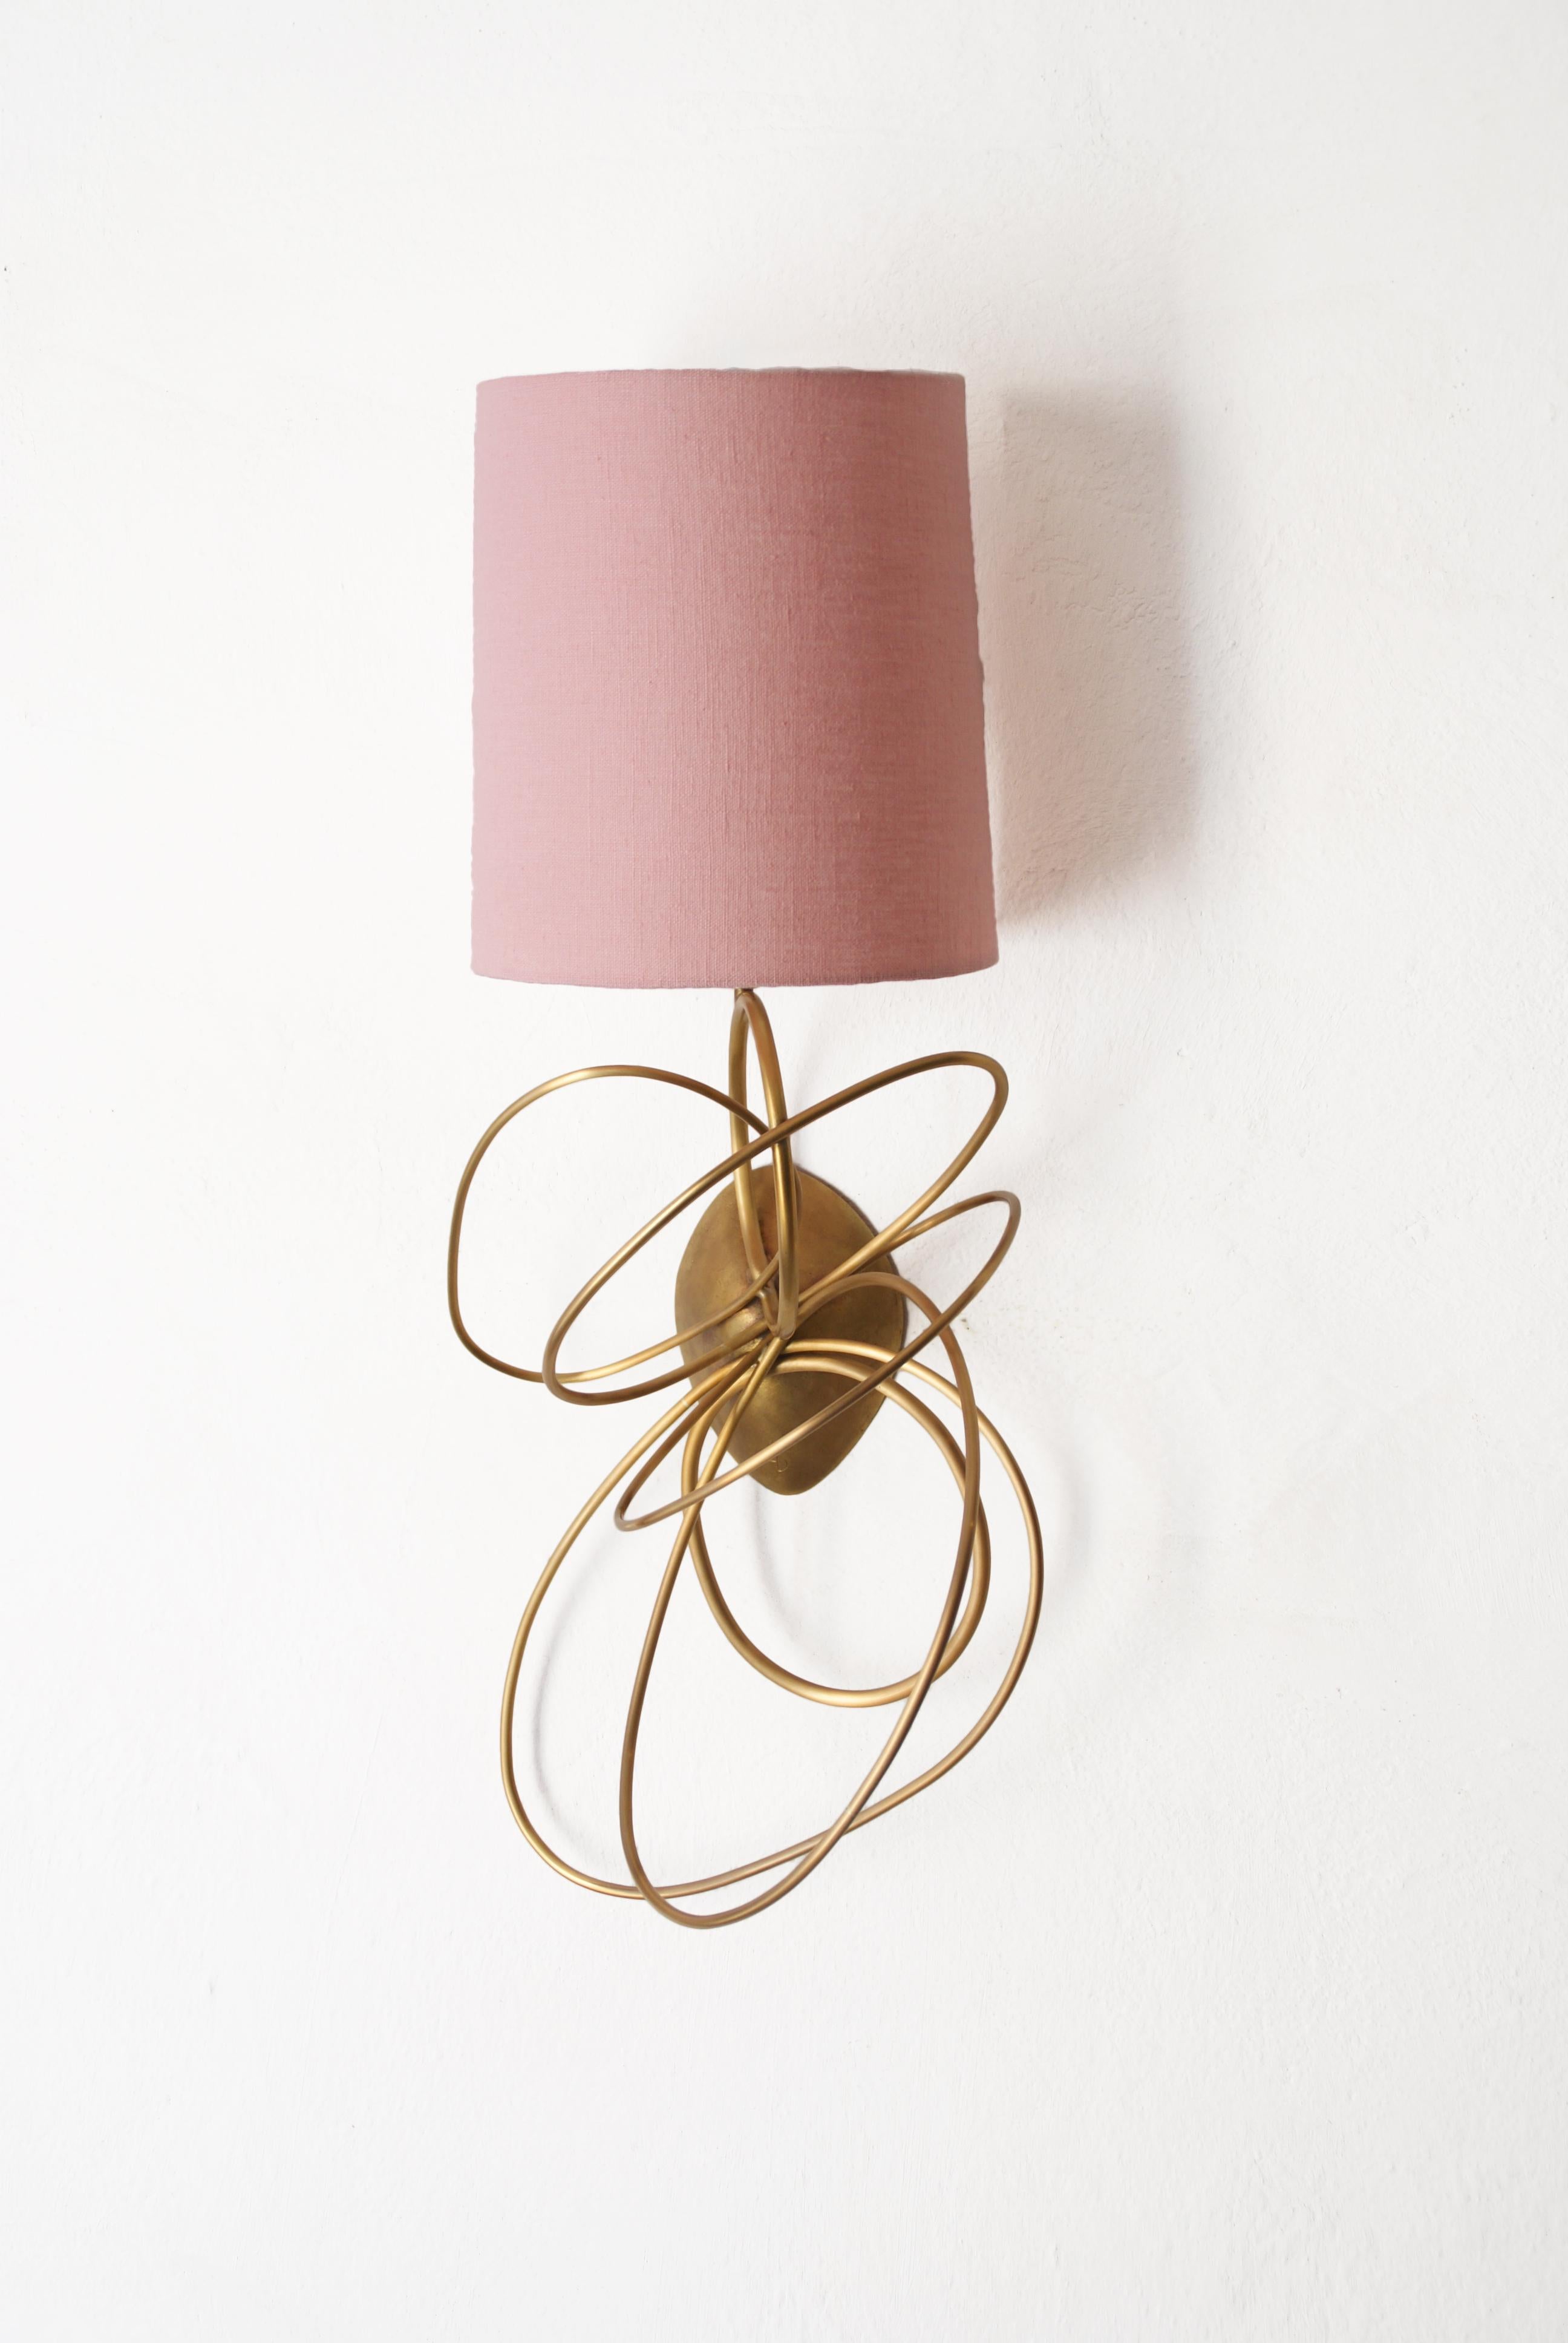 Ellipse Wall Light by Atelier Demichelis
Dimensions: W 20 x D 33 x H 70 cm
Materials: Bronze, Patinated Brass

Laura Demichelis

Laura was born & brought up in Provence, in the south of France.
Trained at the École Boulle in Paris, she obtained her